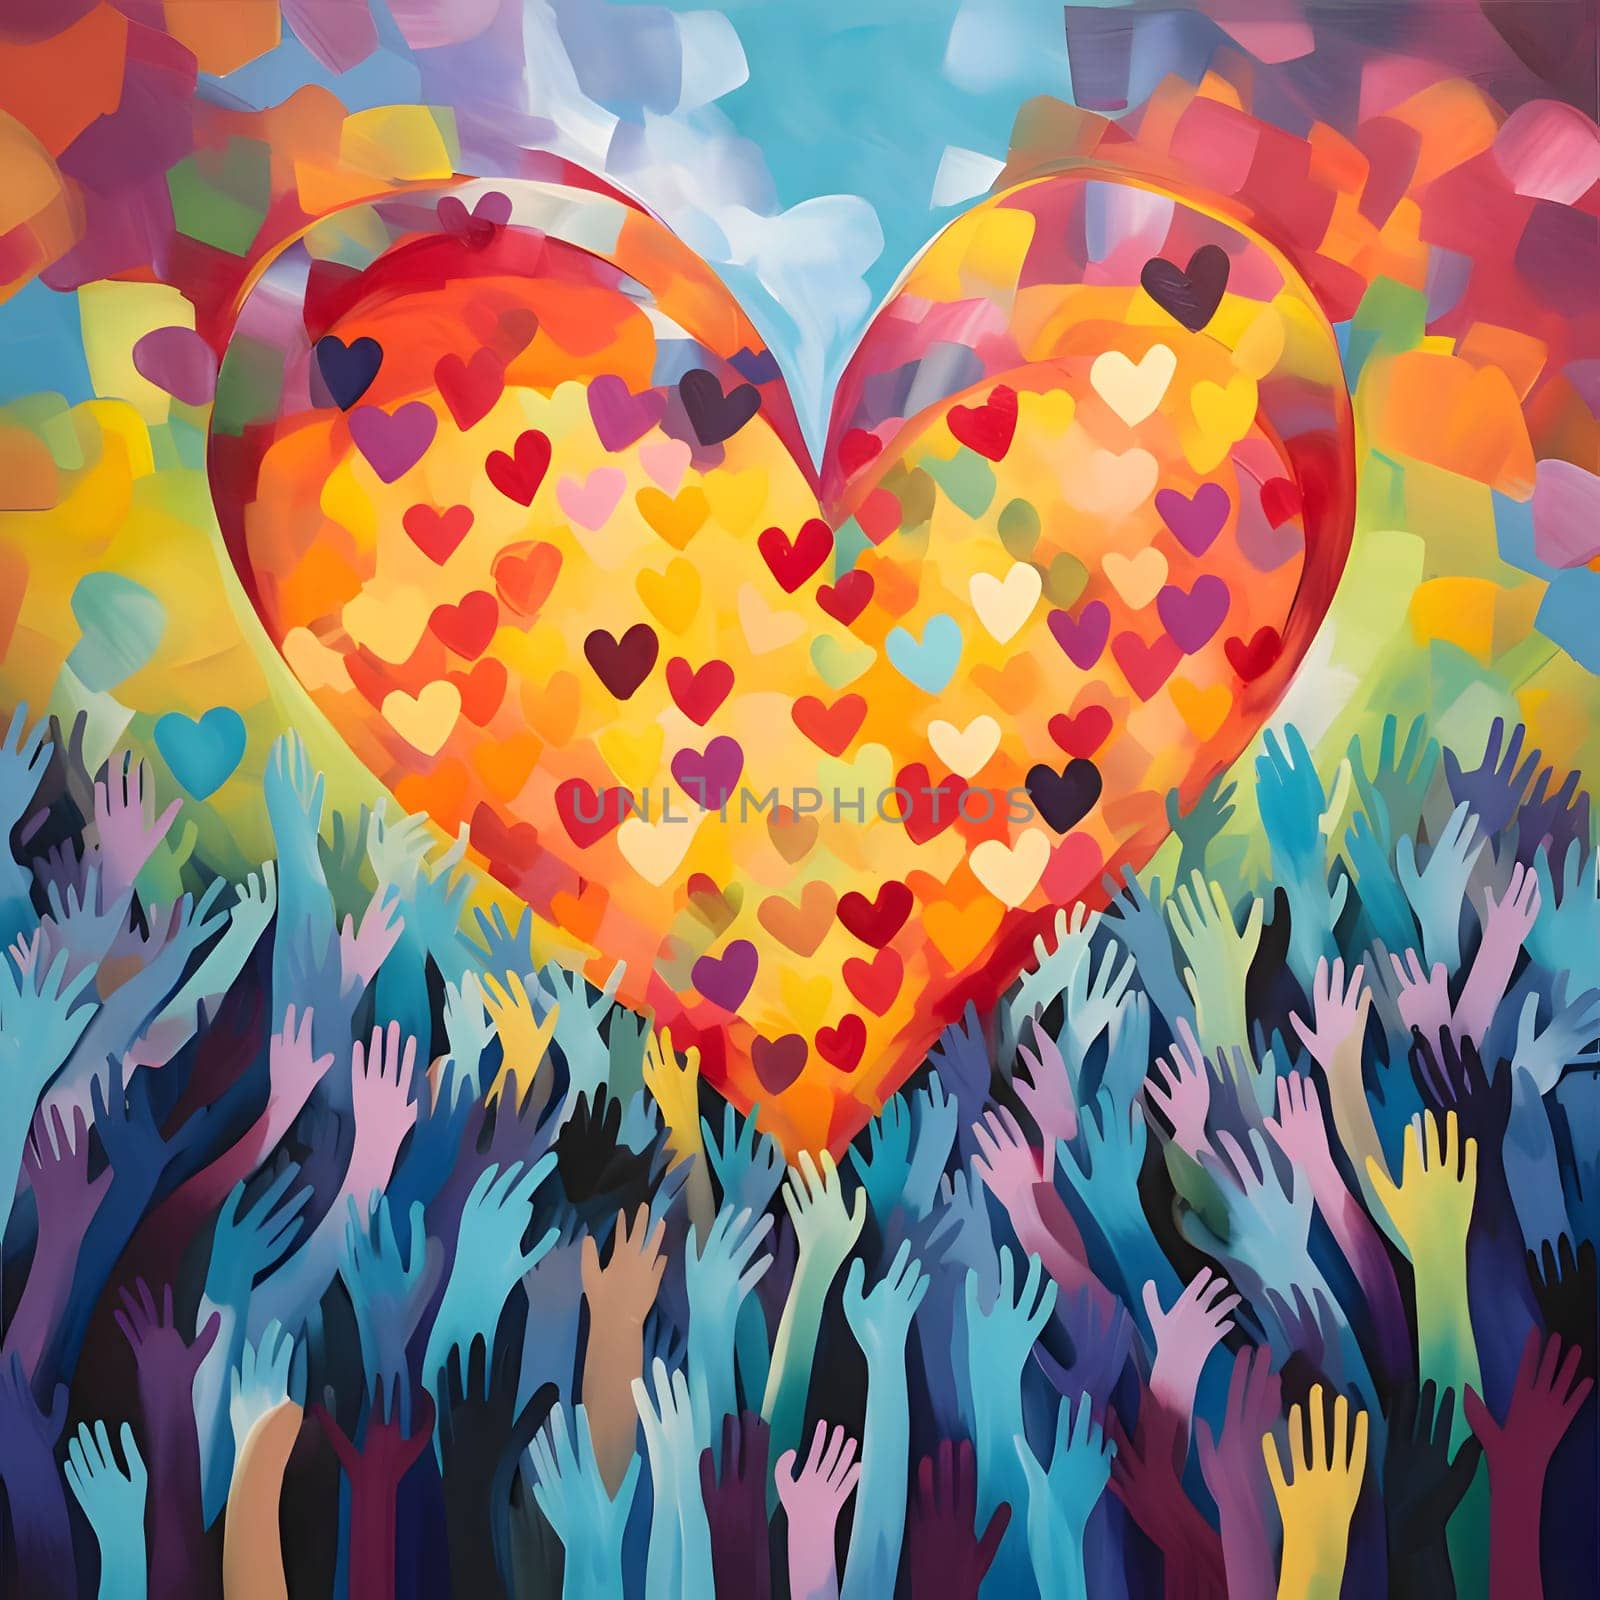 Painted illustration of dozens of colorful hands up opposite painted colorful heart with small hearts in the middle. Heart as a symbol of affection and love. The time of falling in love and love.